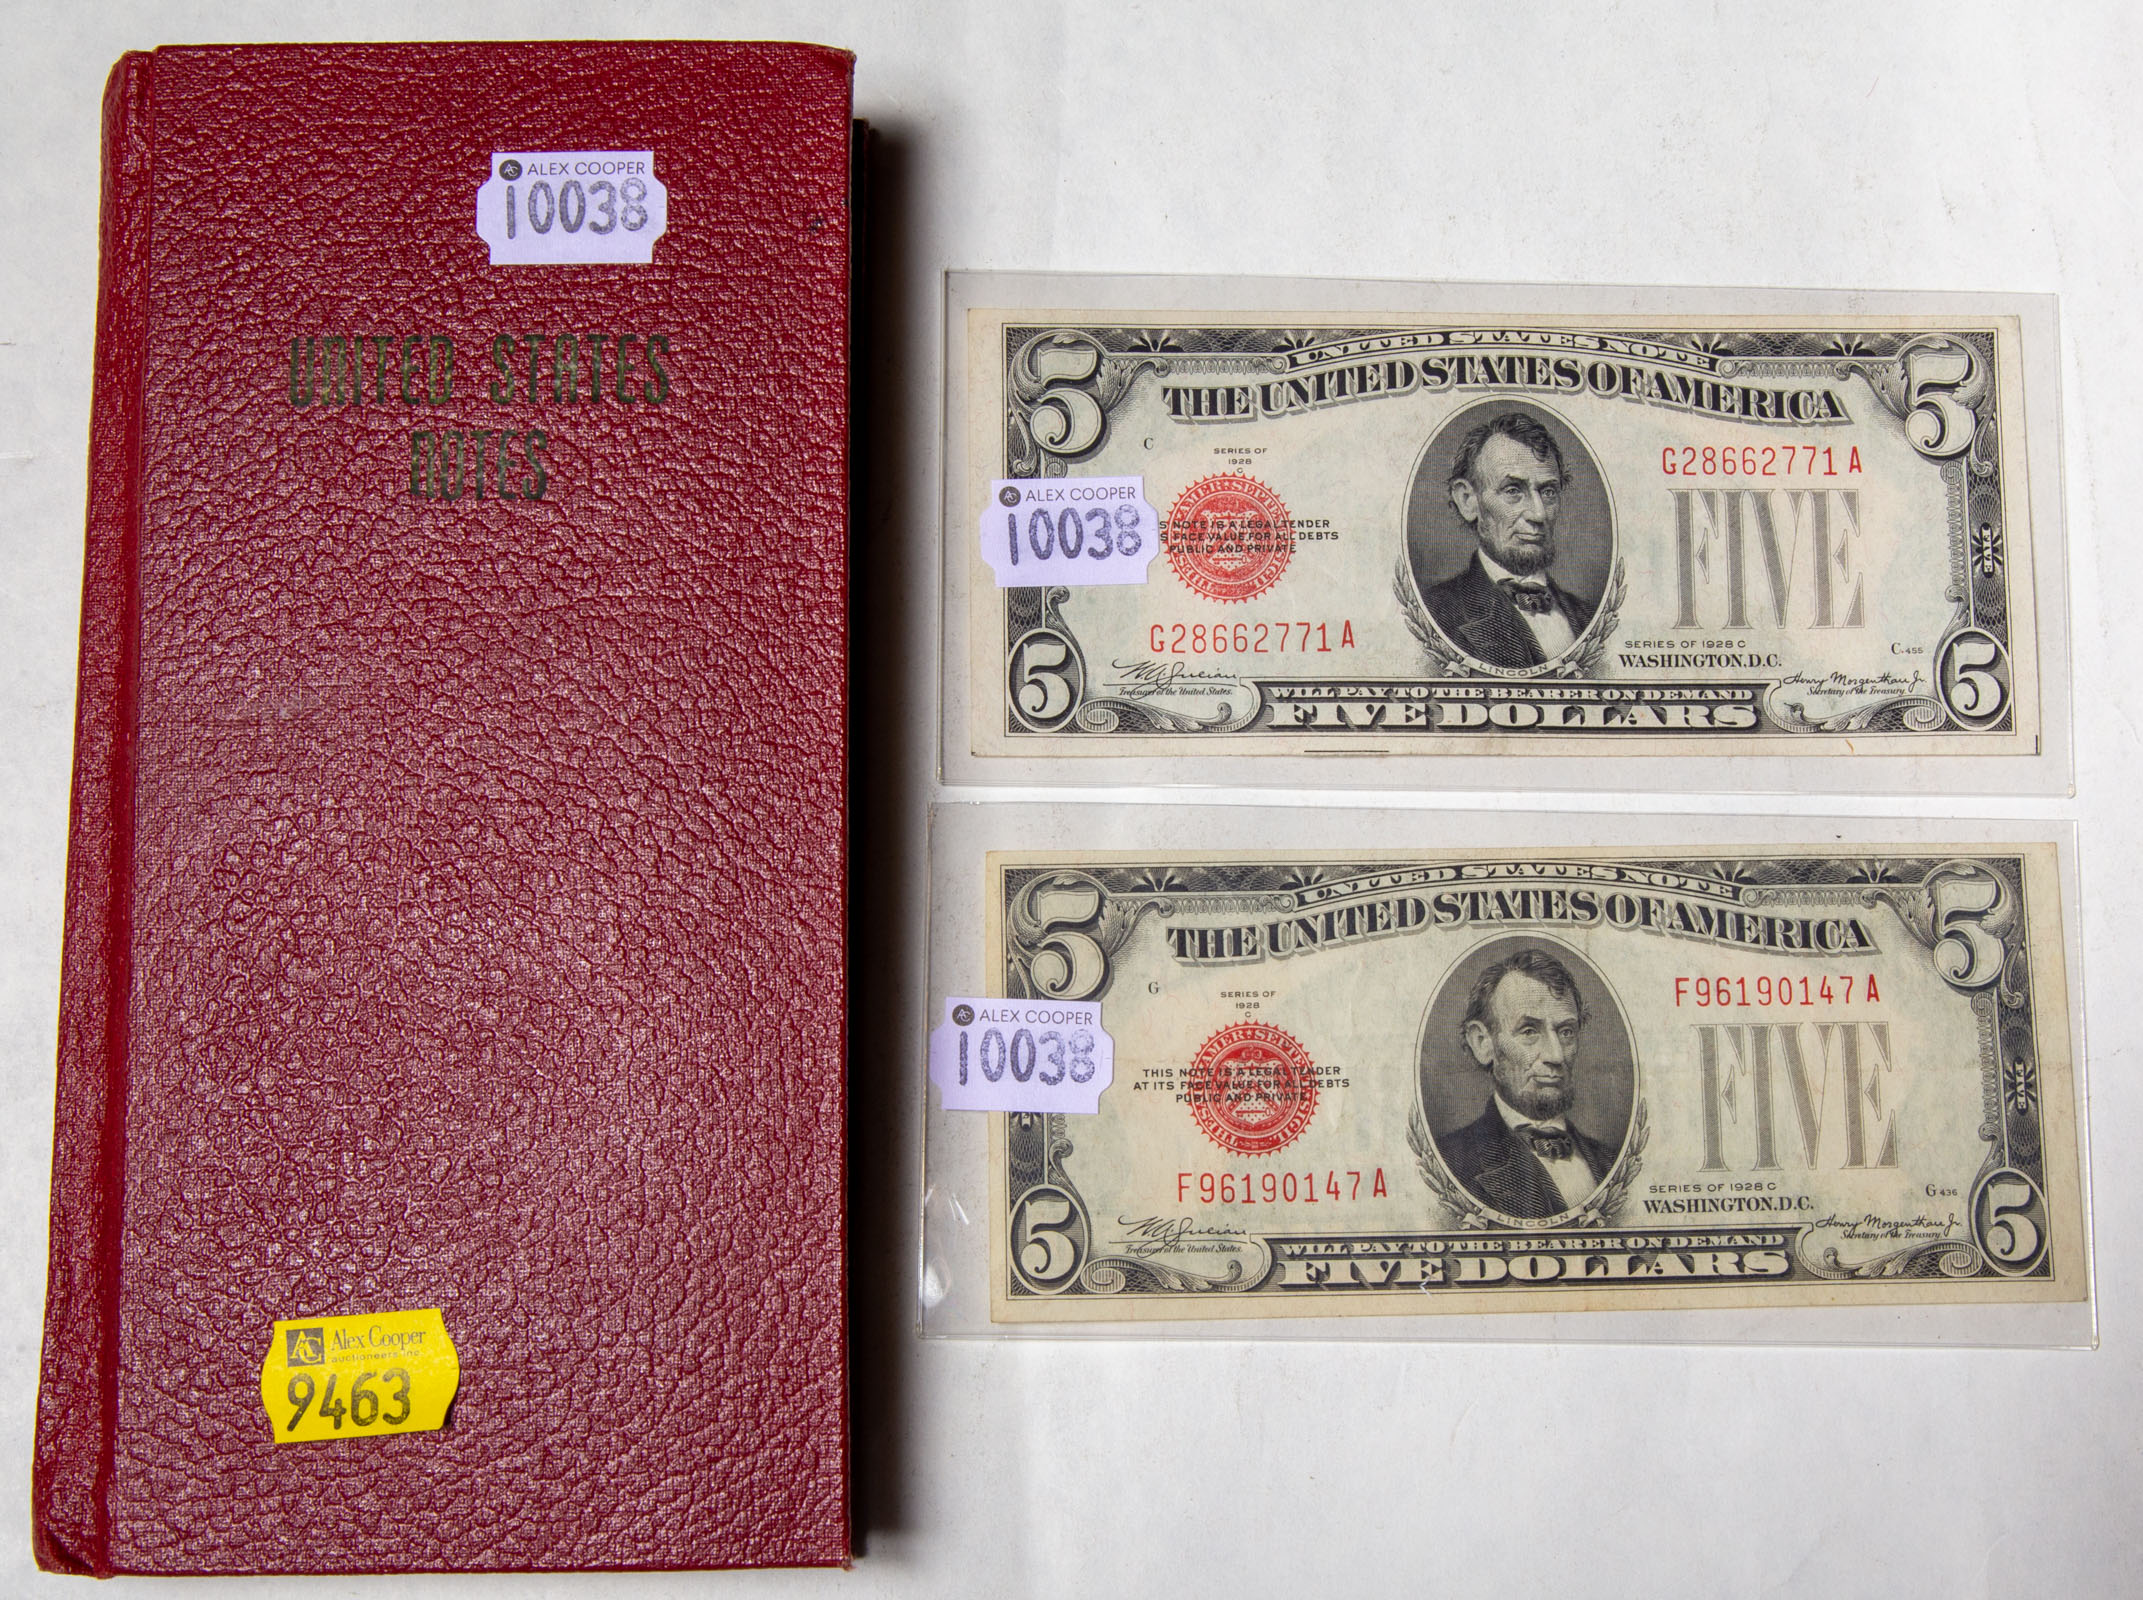 U.S. NOTES NOTEBOOK & TWO 1928C